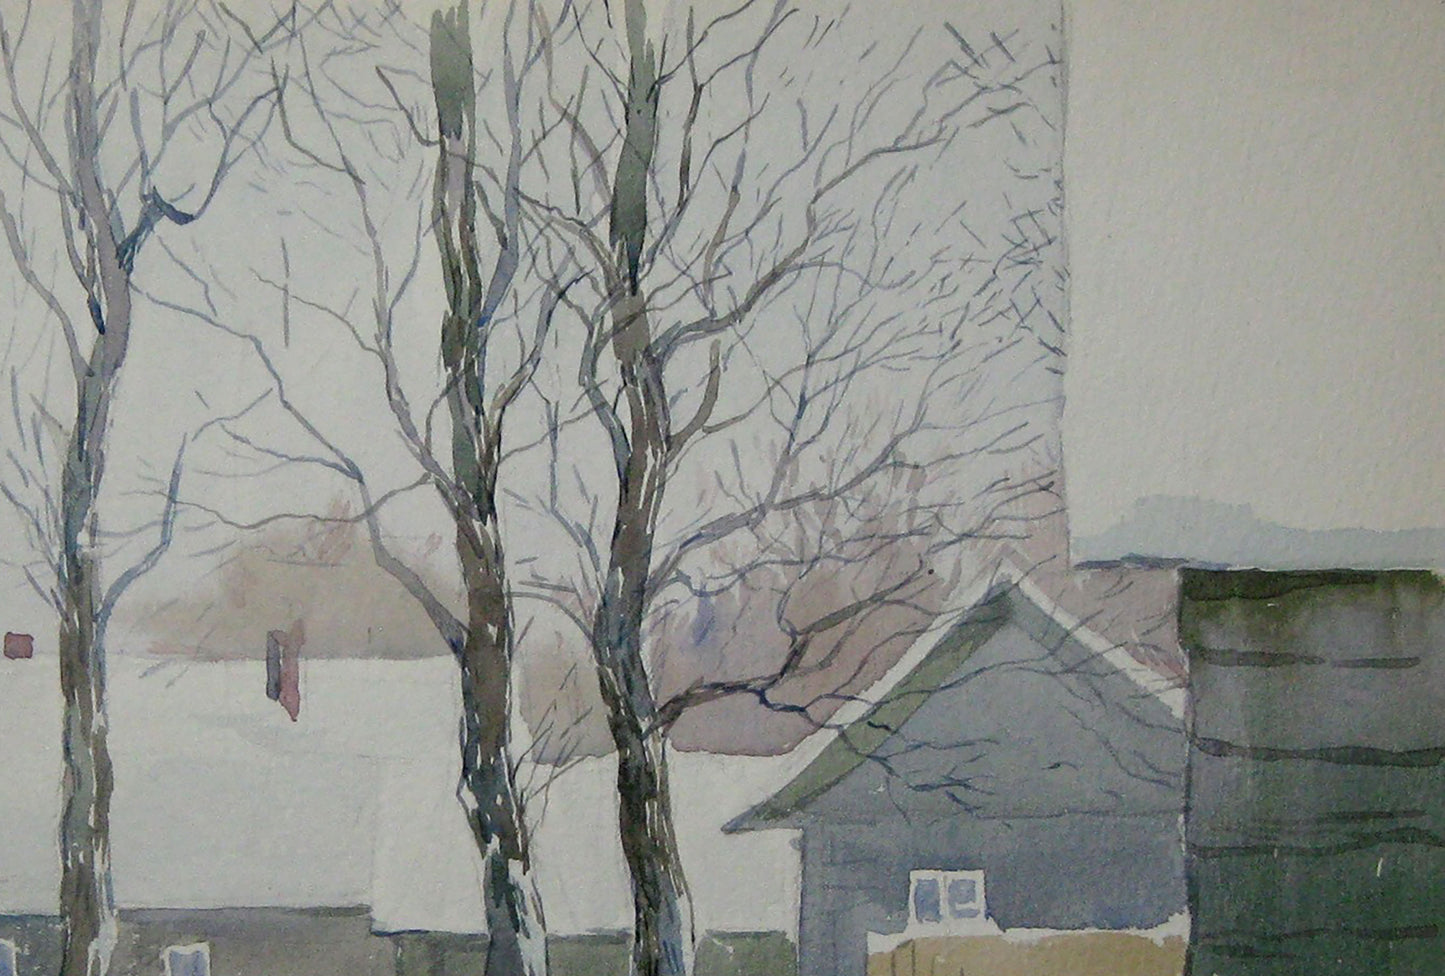 Watercolor painting The first snow fell Savenets Valery